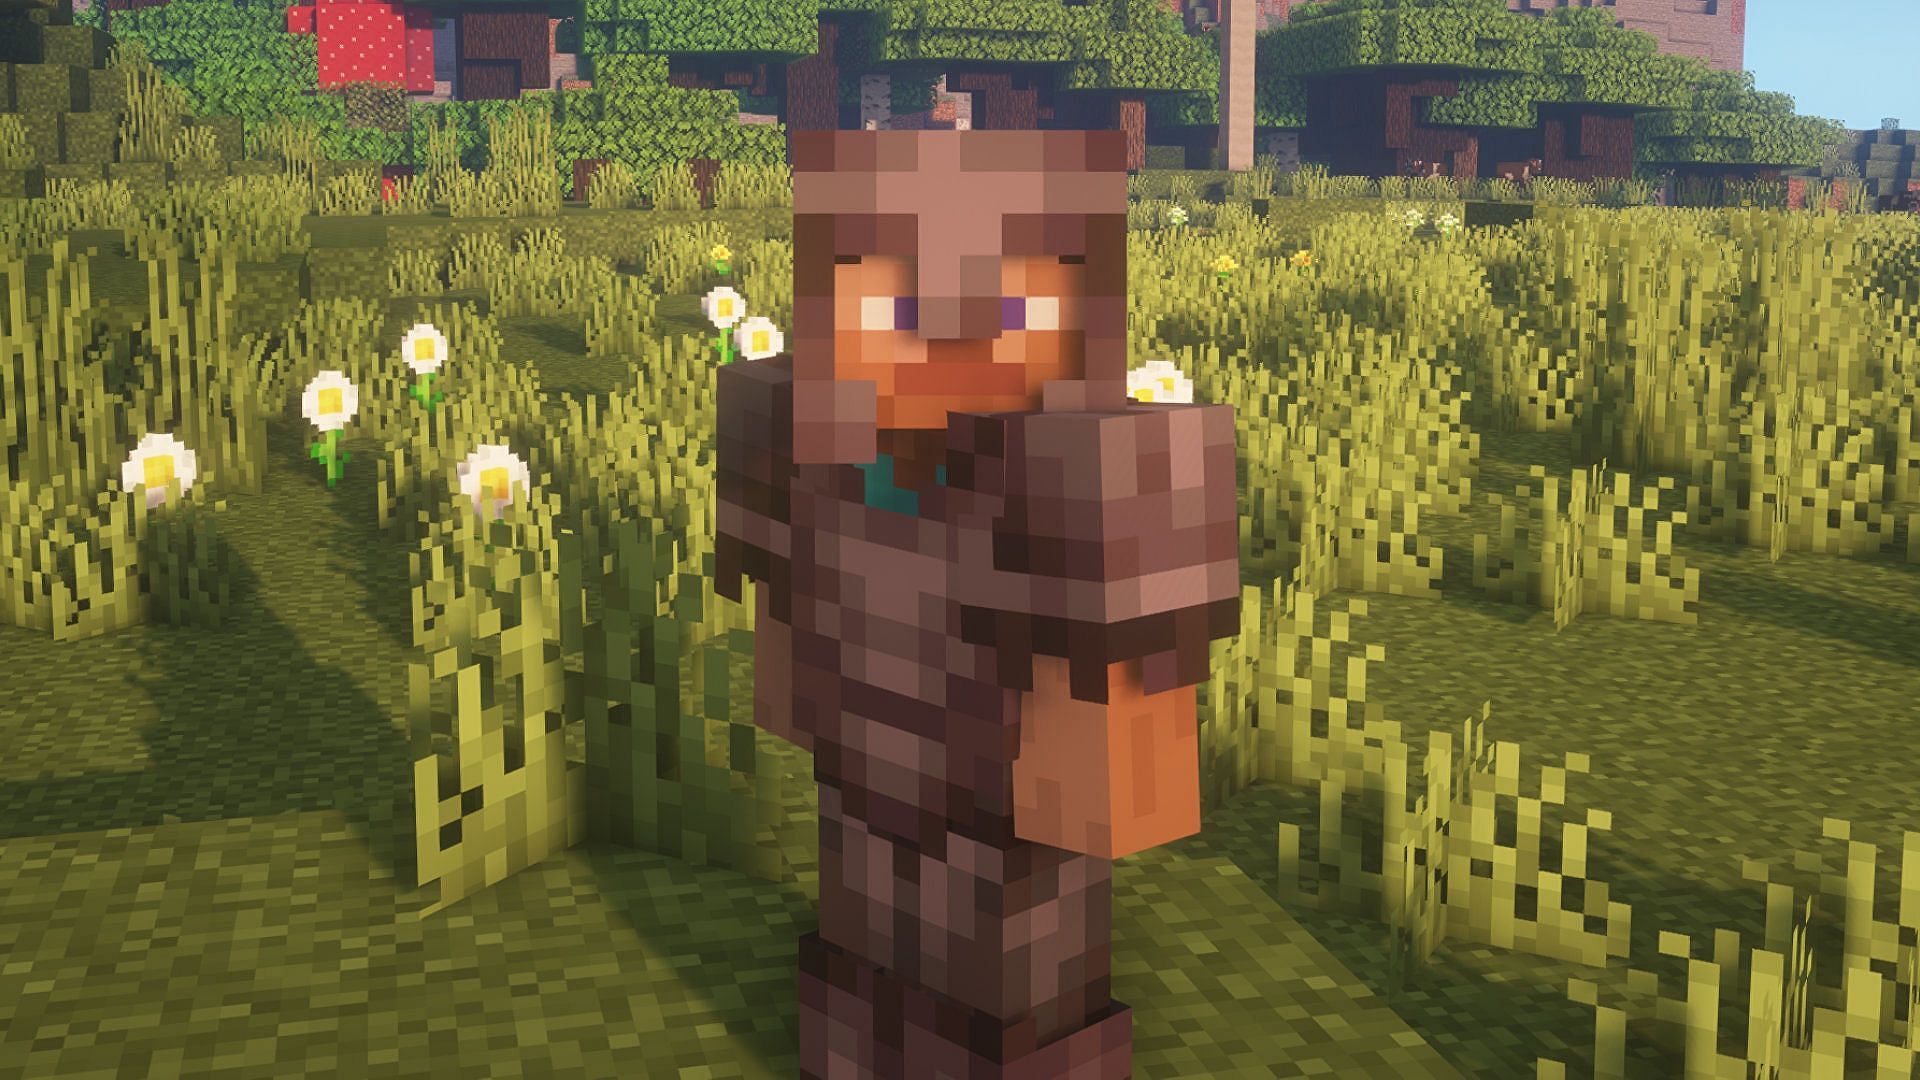 Netherite armor is extremely durable (Image via Minecraft)